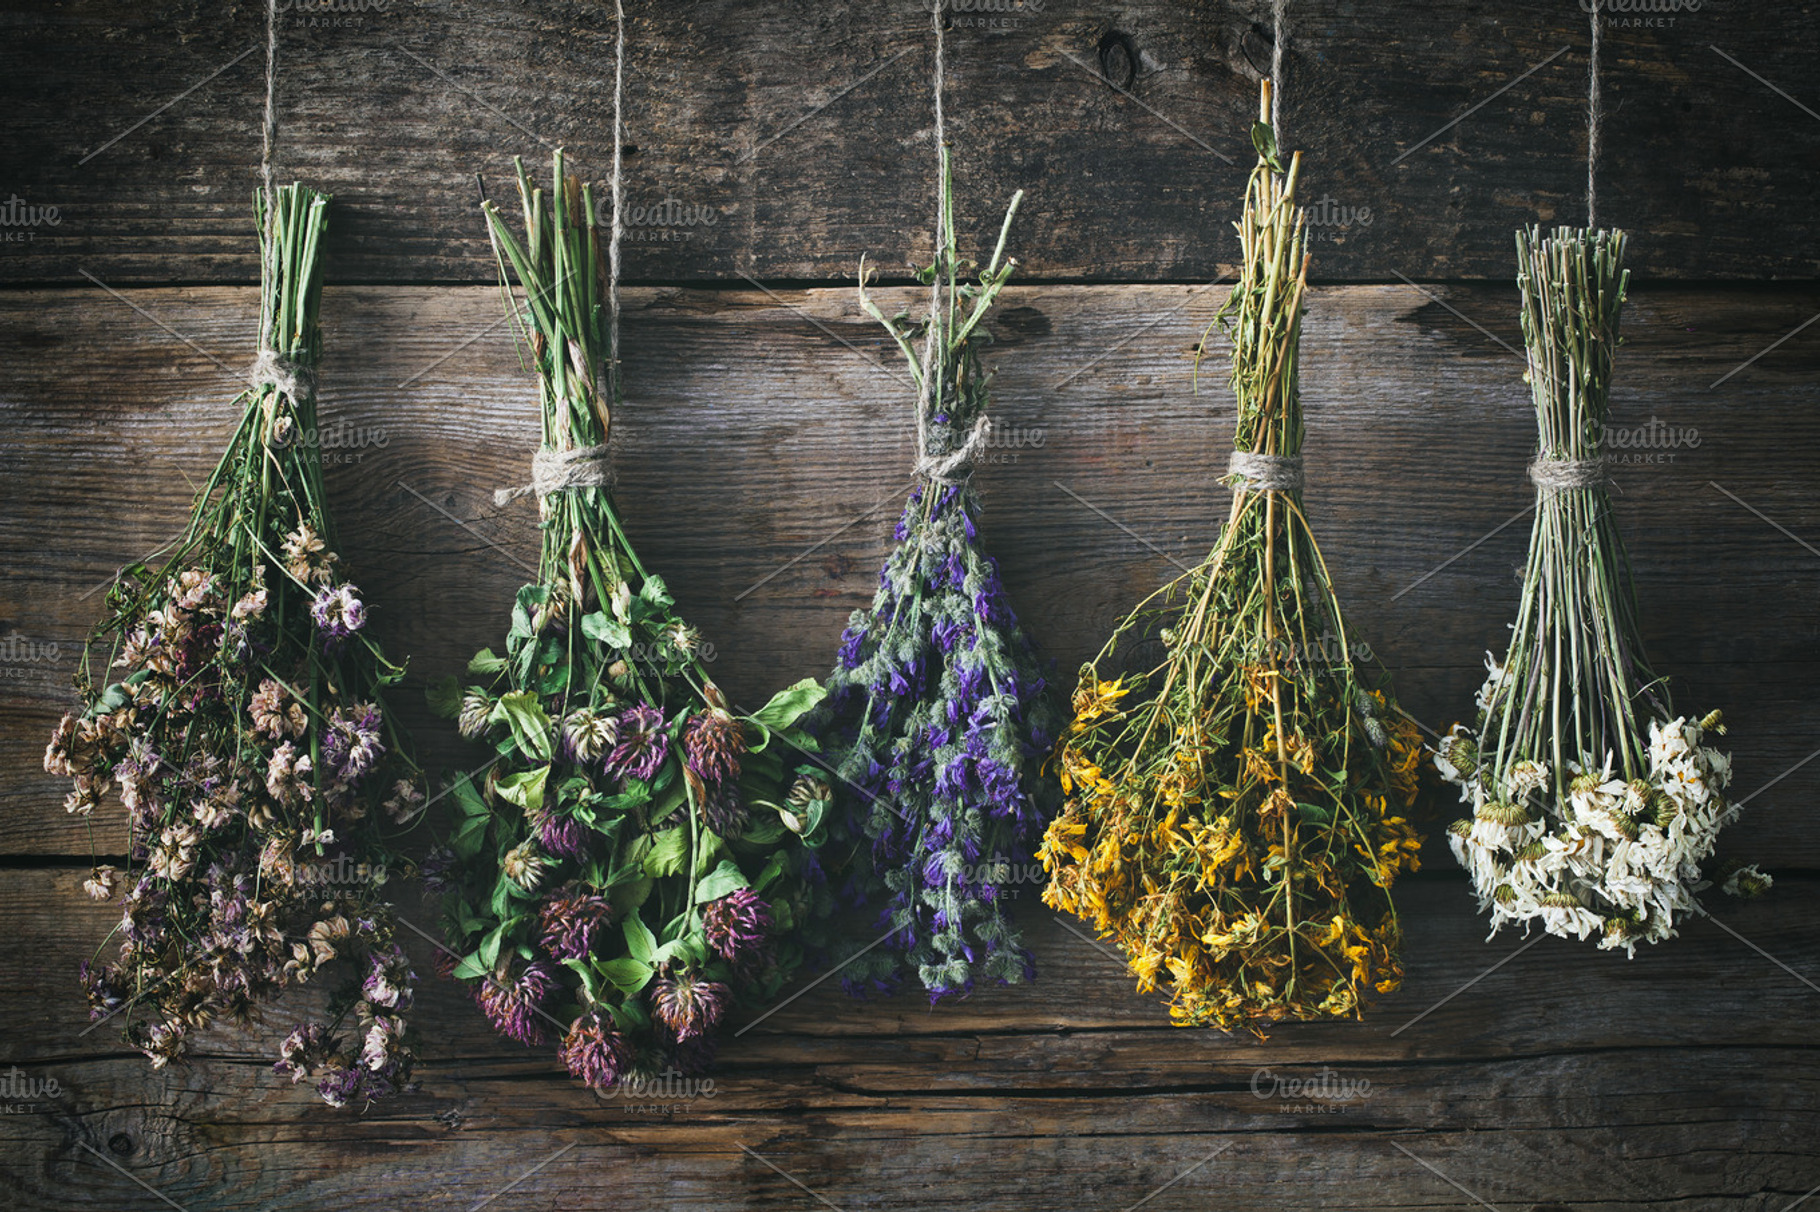 Hanging bunches of medicinal herbs | High-Quality Health Stock Photos